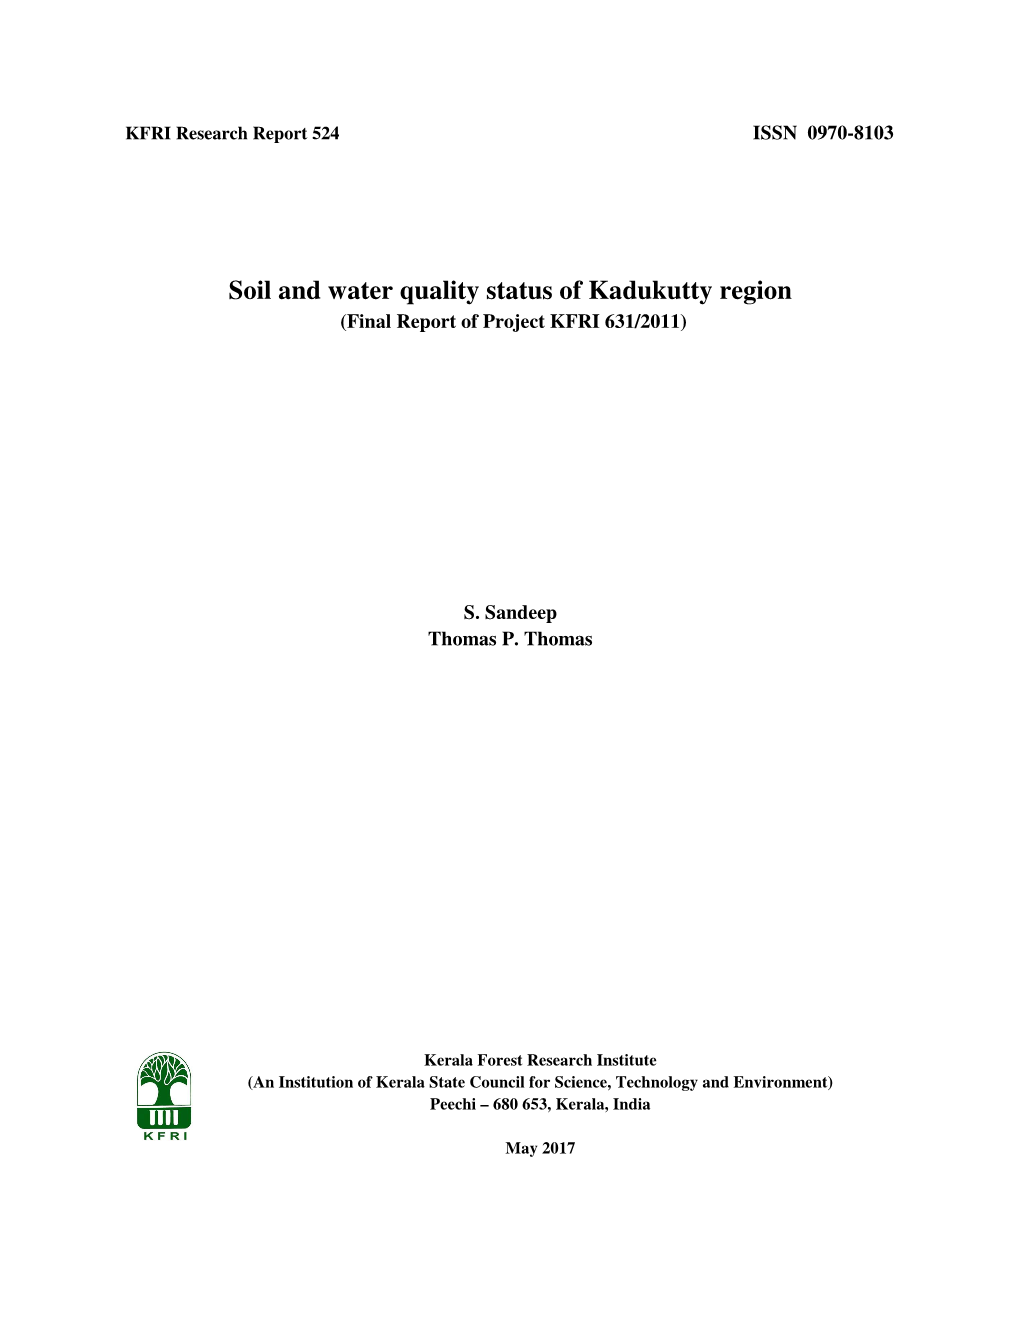 Soil and Water Quality Status of Kadukutty Region (Final Report of Project KFRI 631/2011)